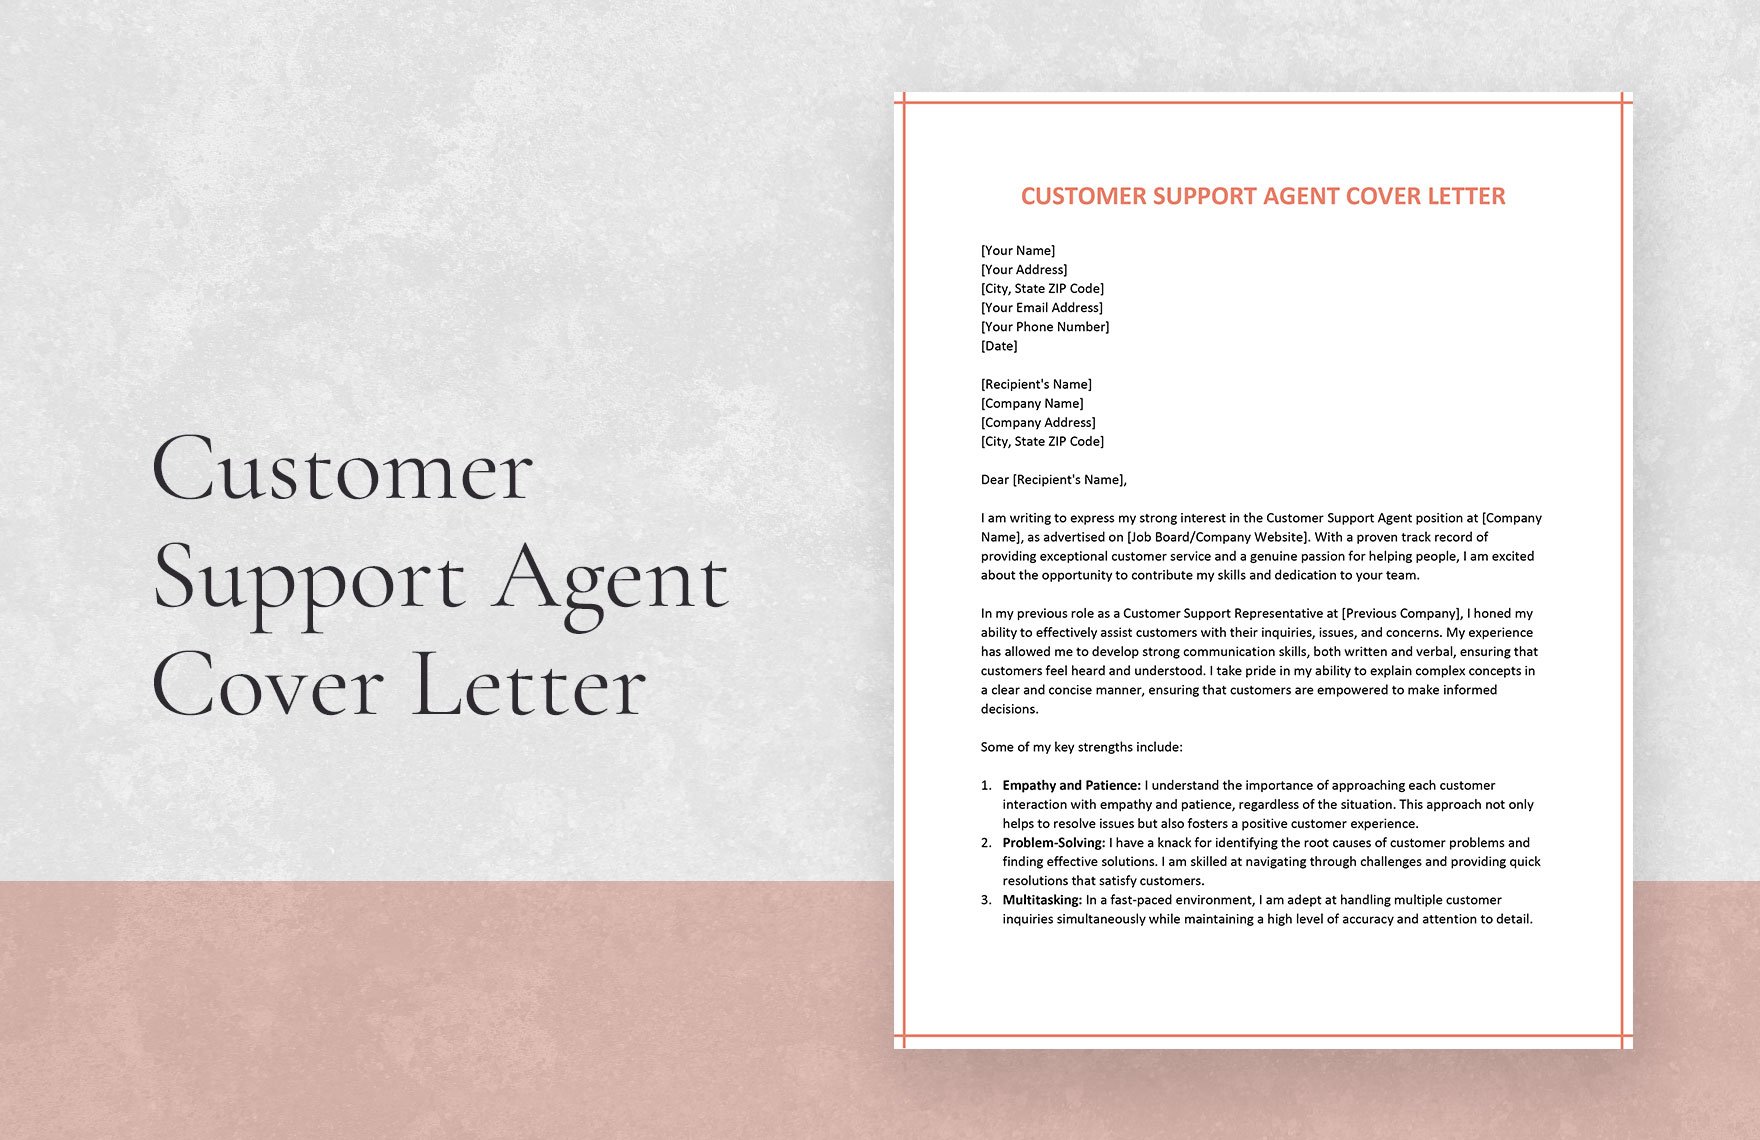 Customer Support Agent Cover Letter